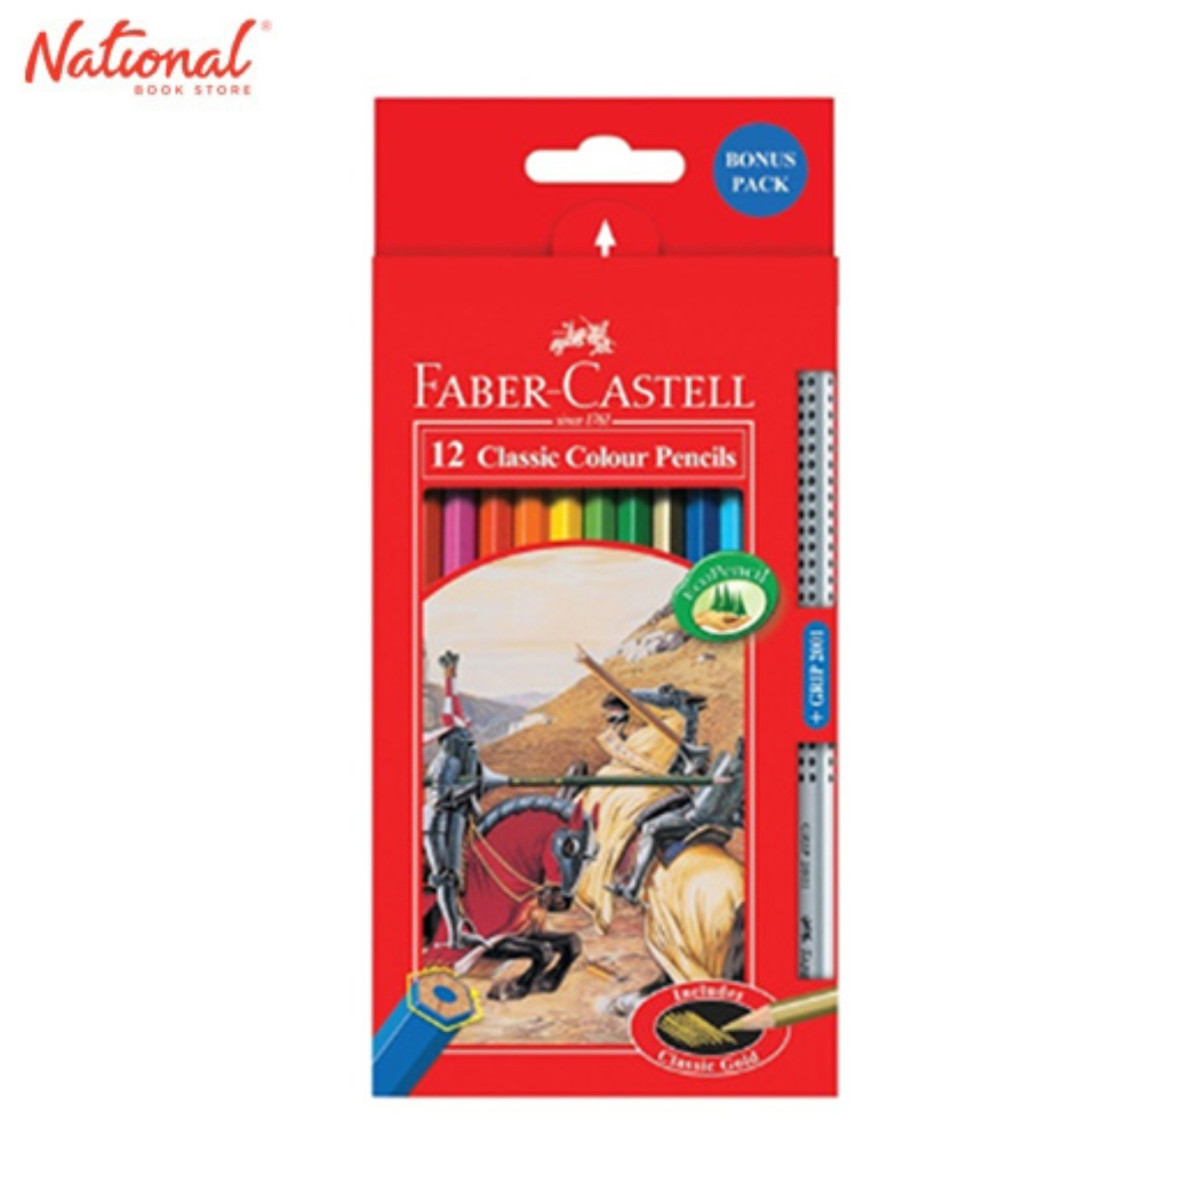 FABER-CASTELL CLASSIC COLORED PENCIL 12115852 12 COLORS LONG